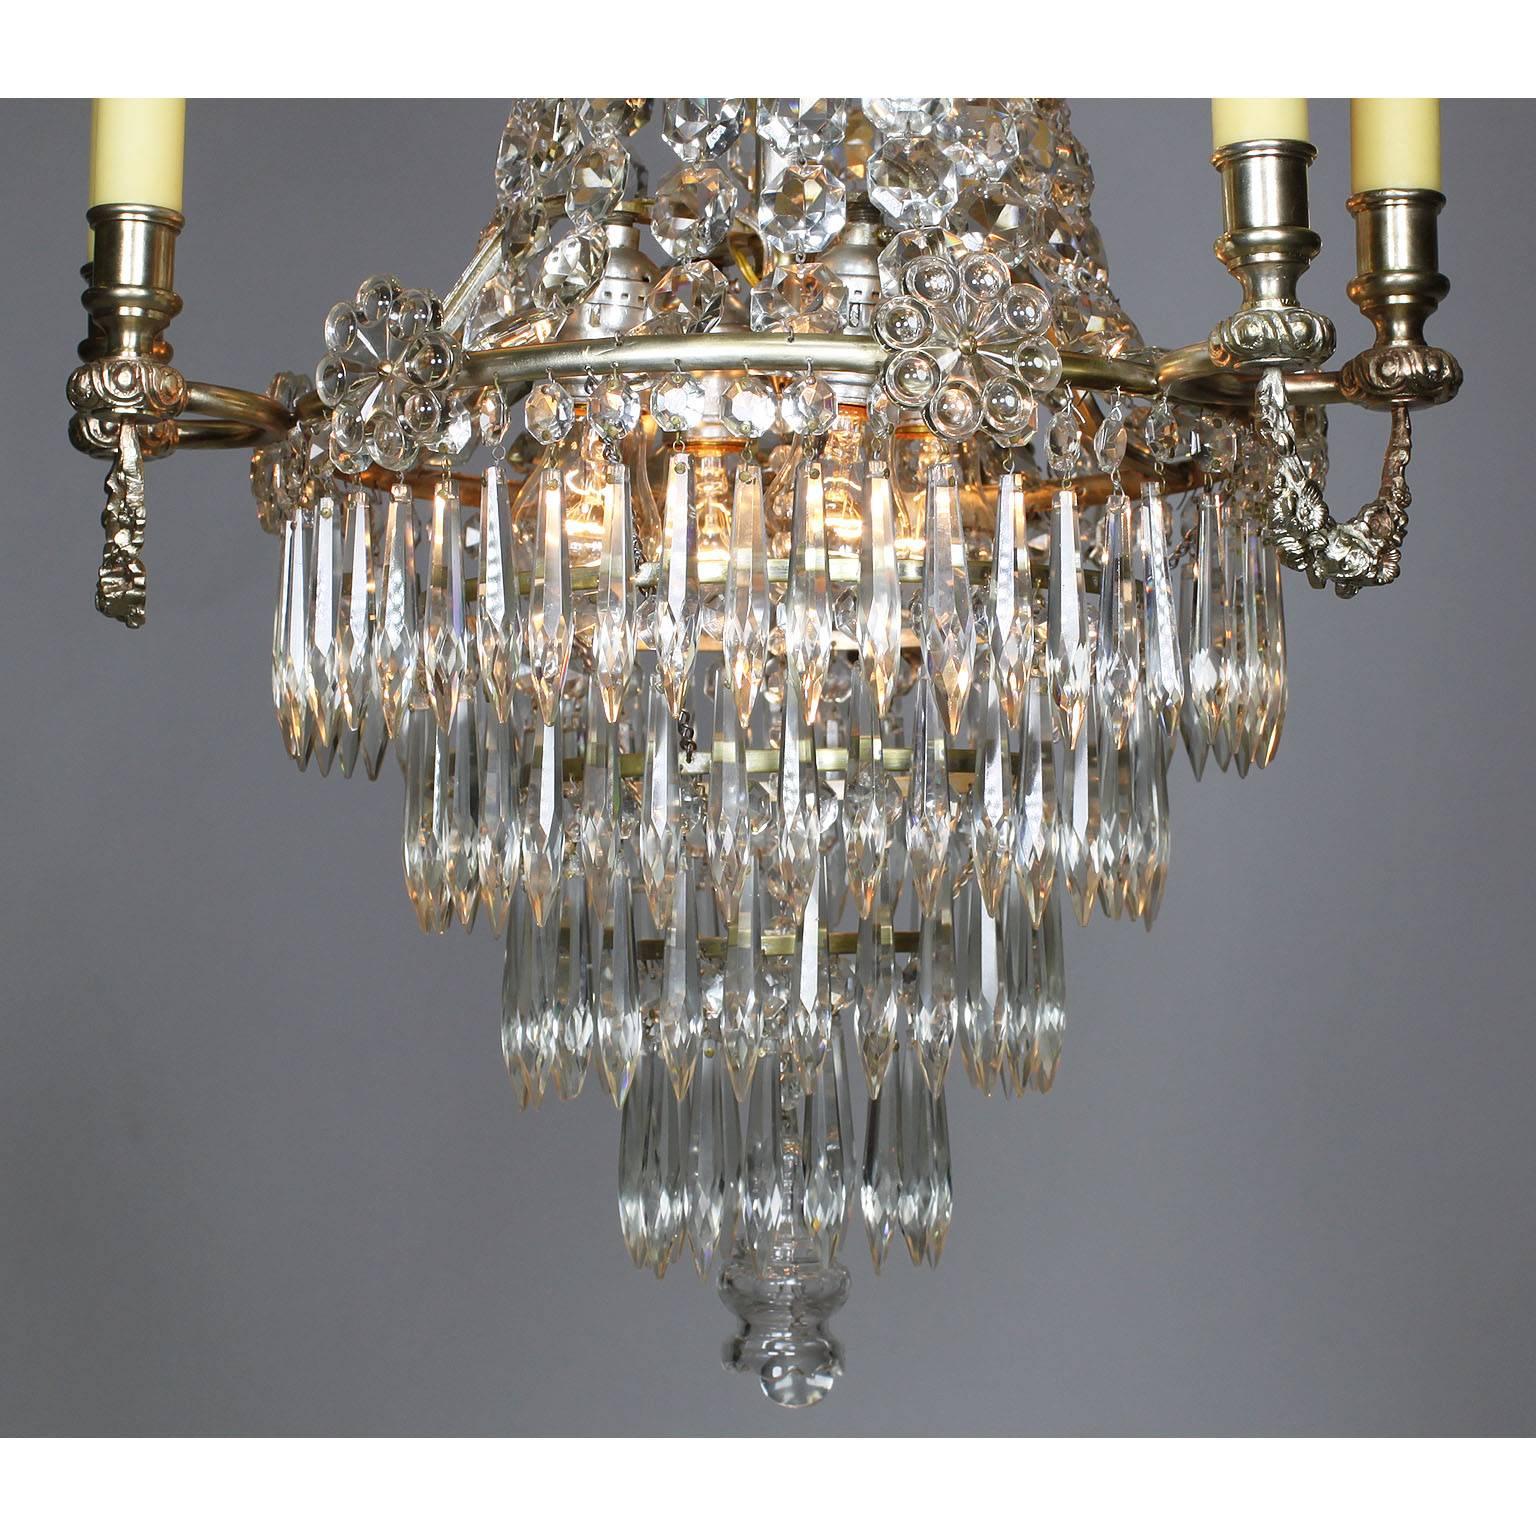 Early 20th Century French 19th-20th Century Louis XVI Style Silvered Bronze & Cut-Glass Chandelier For Sale